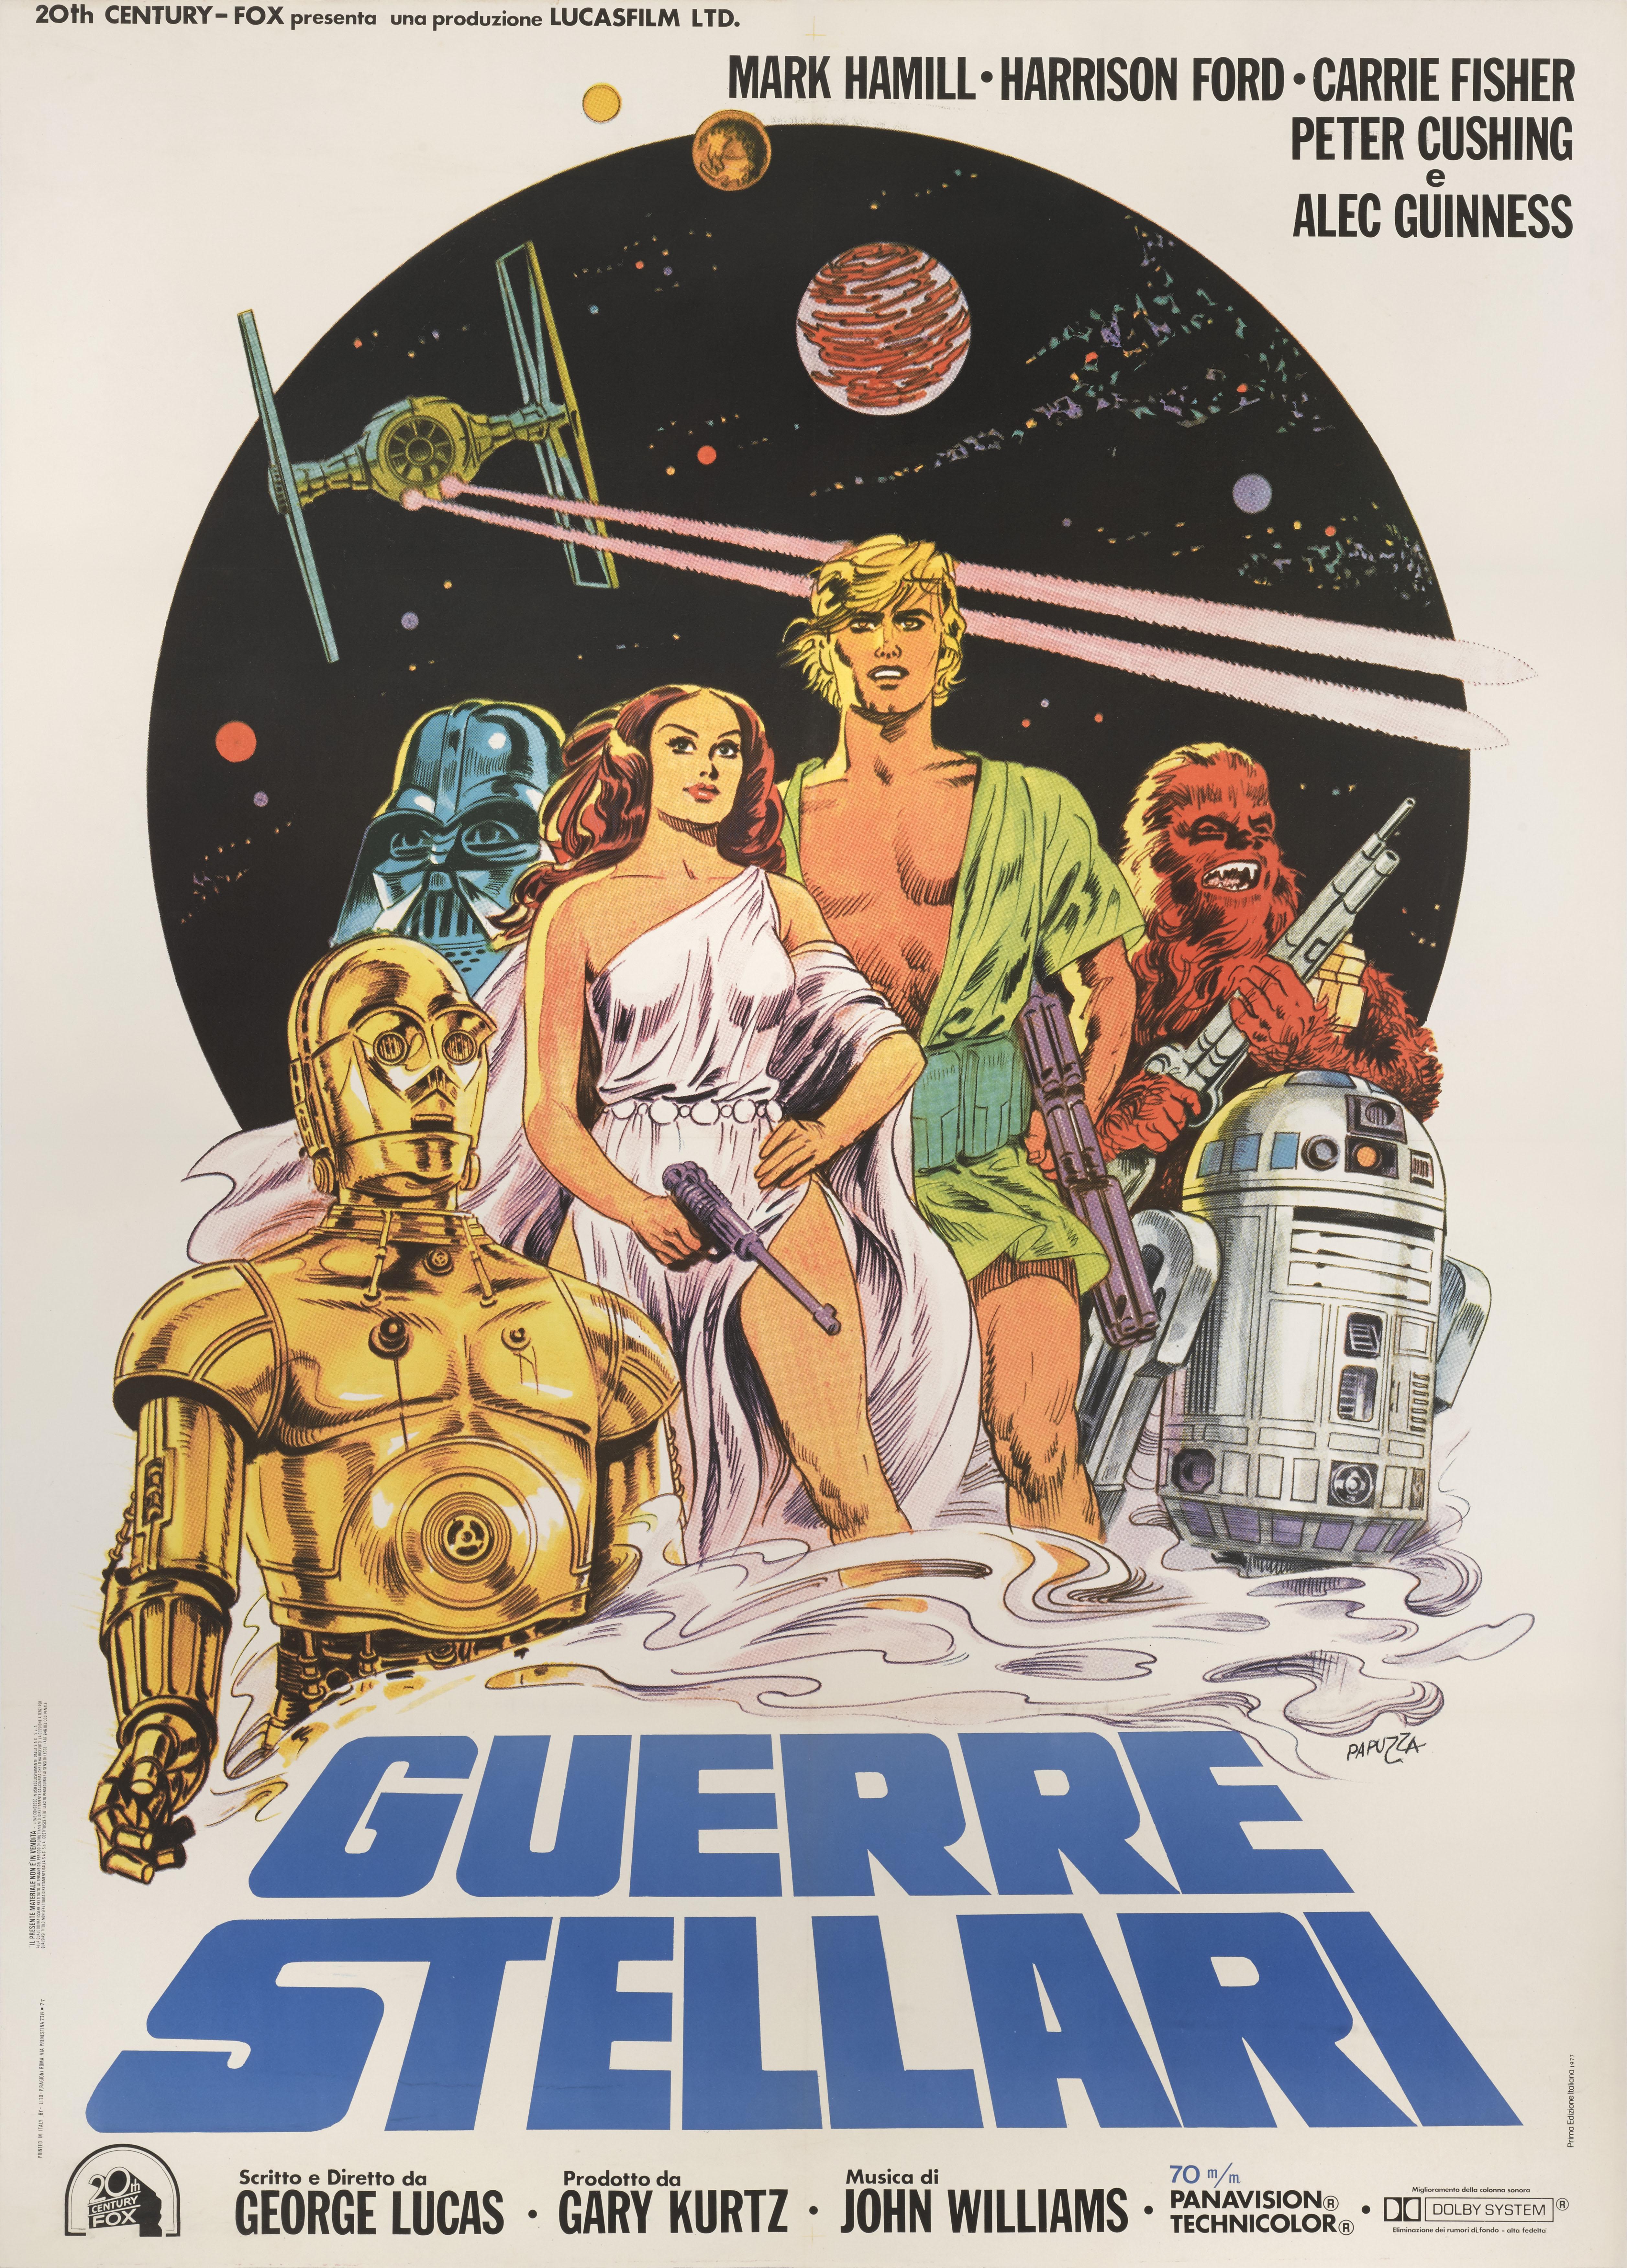 Original Italian film poster for Star Wars 1977.
The film was directed by George Lucas and starred Mark Hamill, Harrison Ford, Carrie Fisher. The coulourful artwork on this poster was designed by Michelangelo Papuzza (dates unknown) and is unique